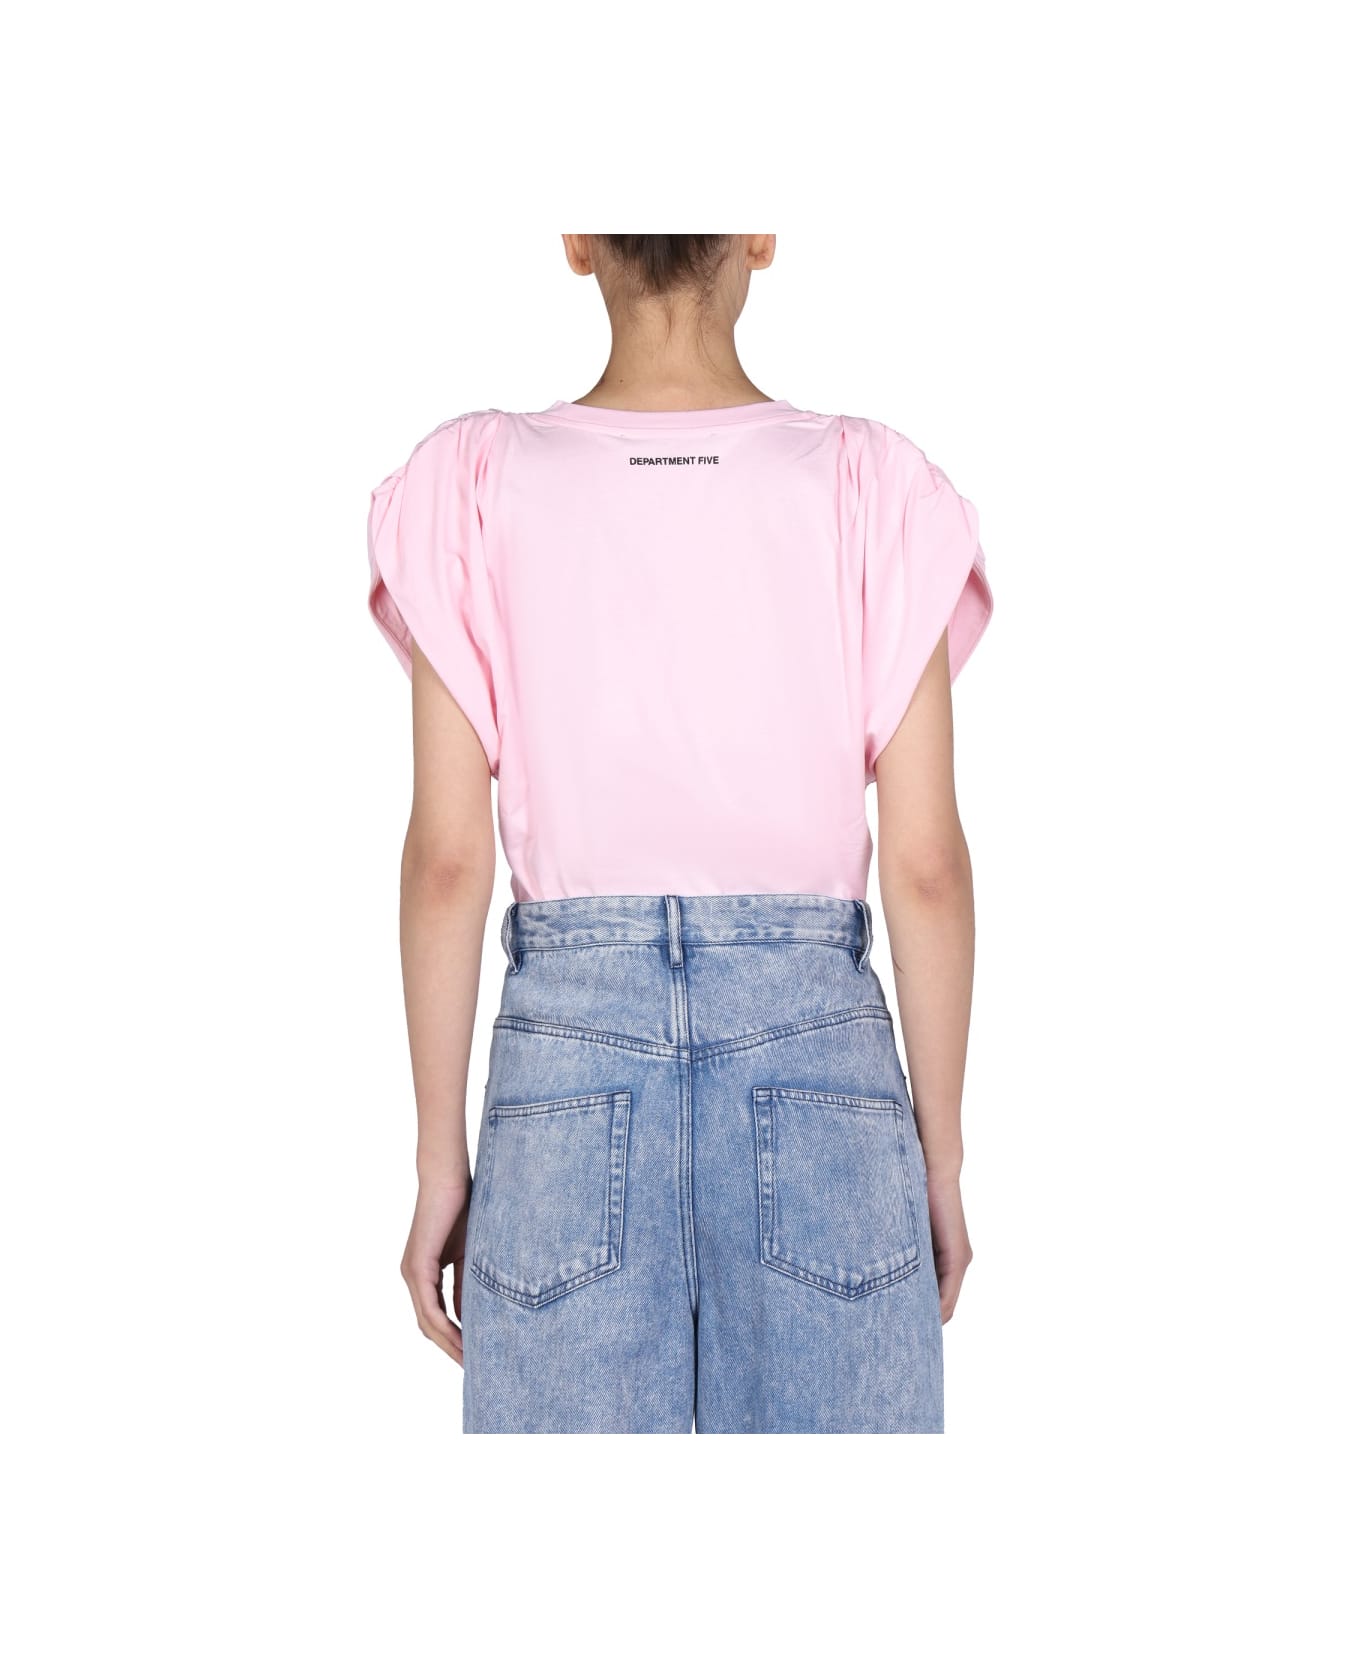 Department Five "hollywood" T-shirt - PINK Tシャツ